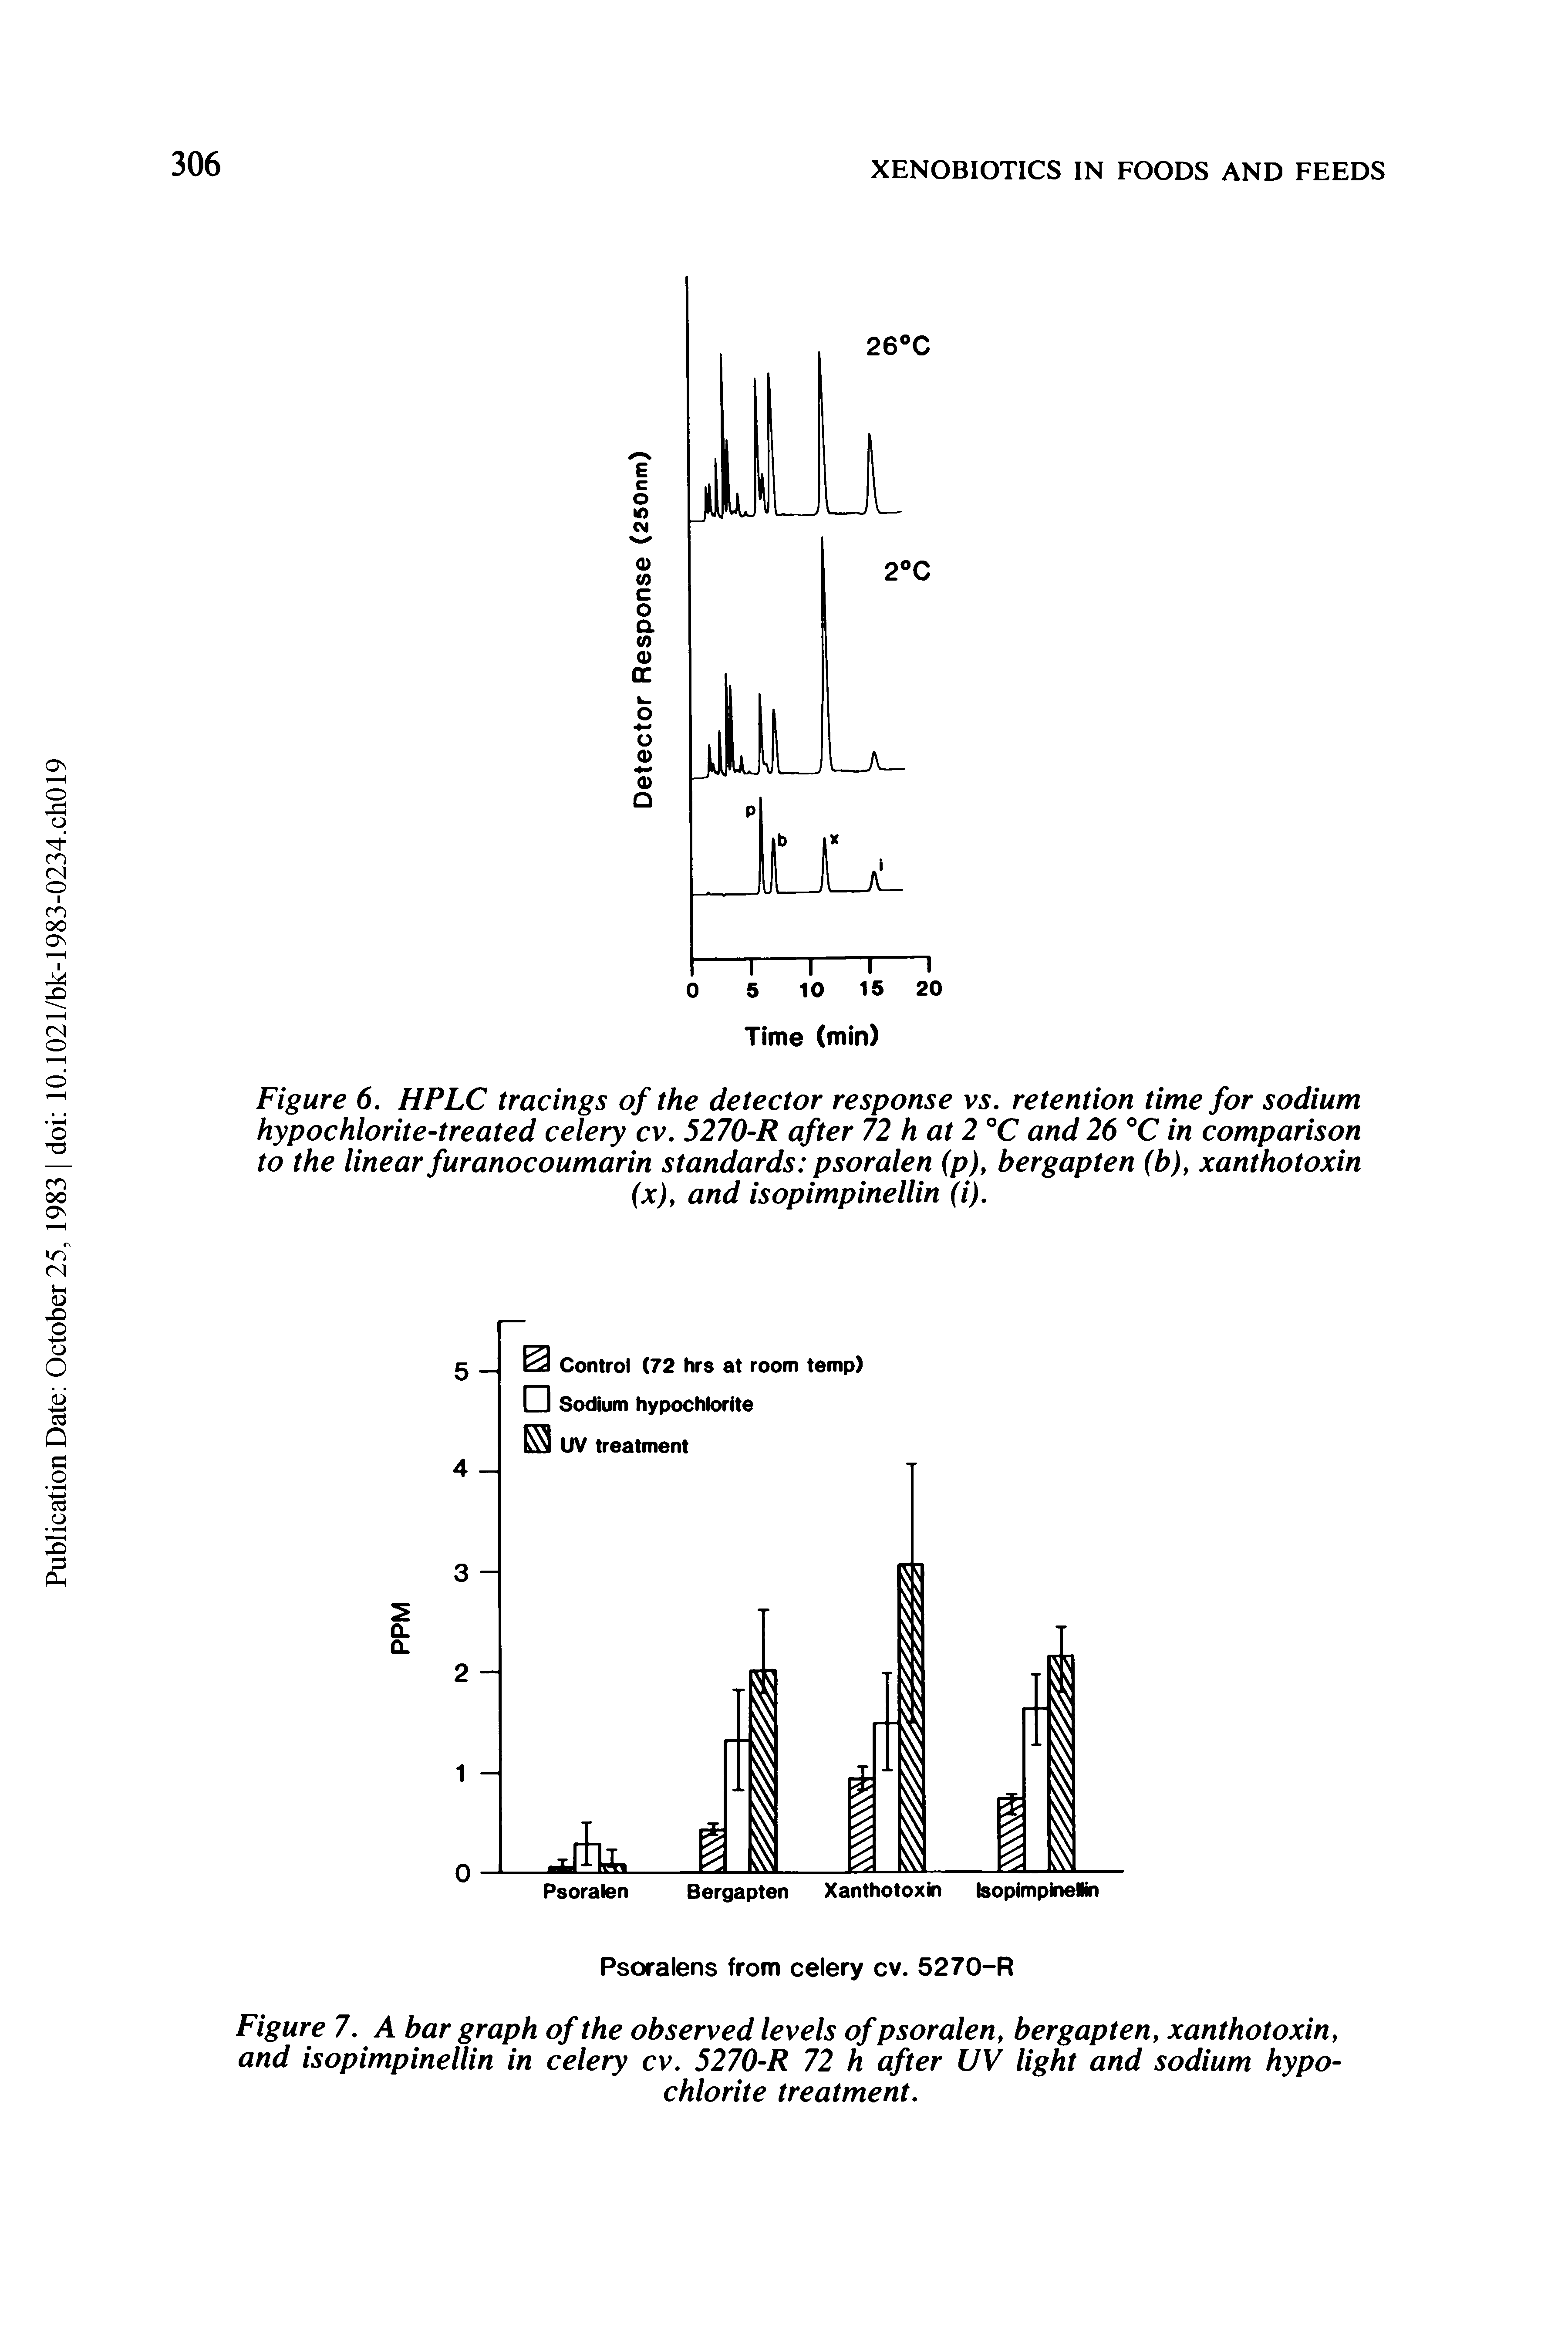 Figure 7. A bar graph of the observed levels of psoralen, bergapten, xanthotoxin, and isopimpinellin in celery cv. 5270-R 72 h after UV light and sodium hypochlorite treatment.